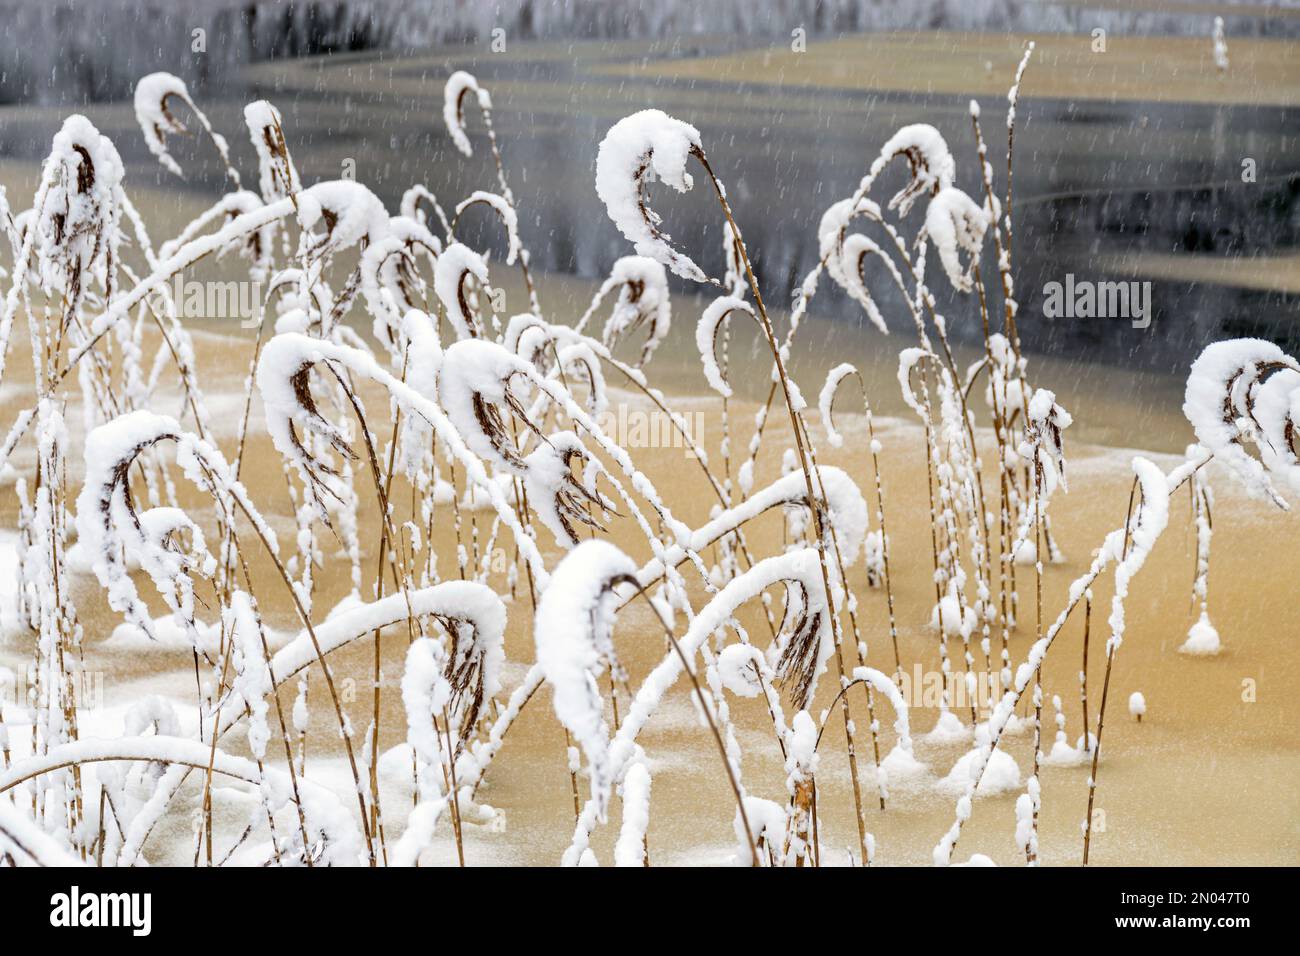 snowy reeds on the river bank, interesting patterns, foggy and grainy snow fall background, winter by the river Stock Photo